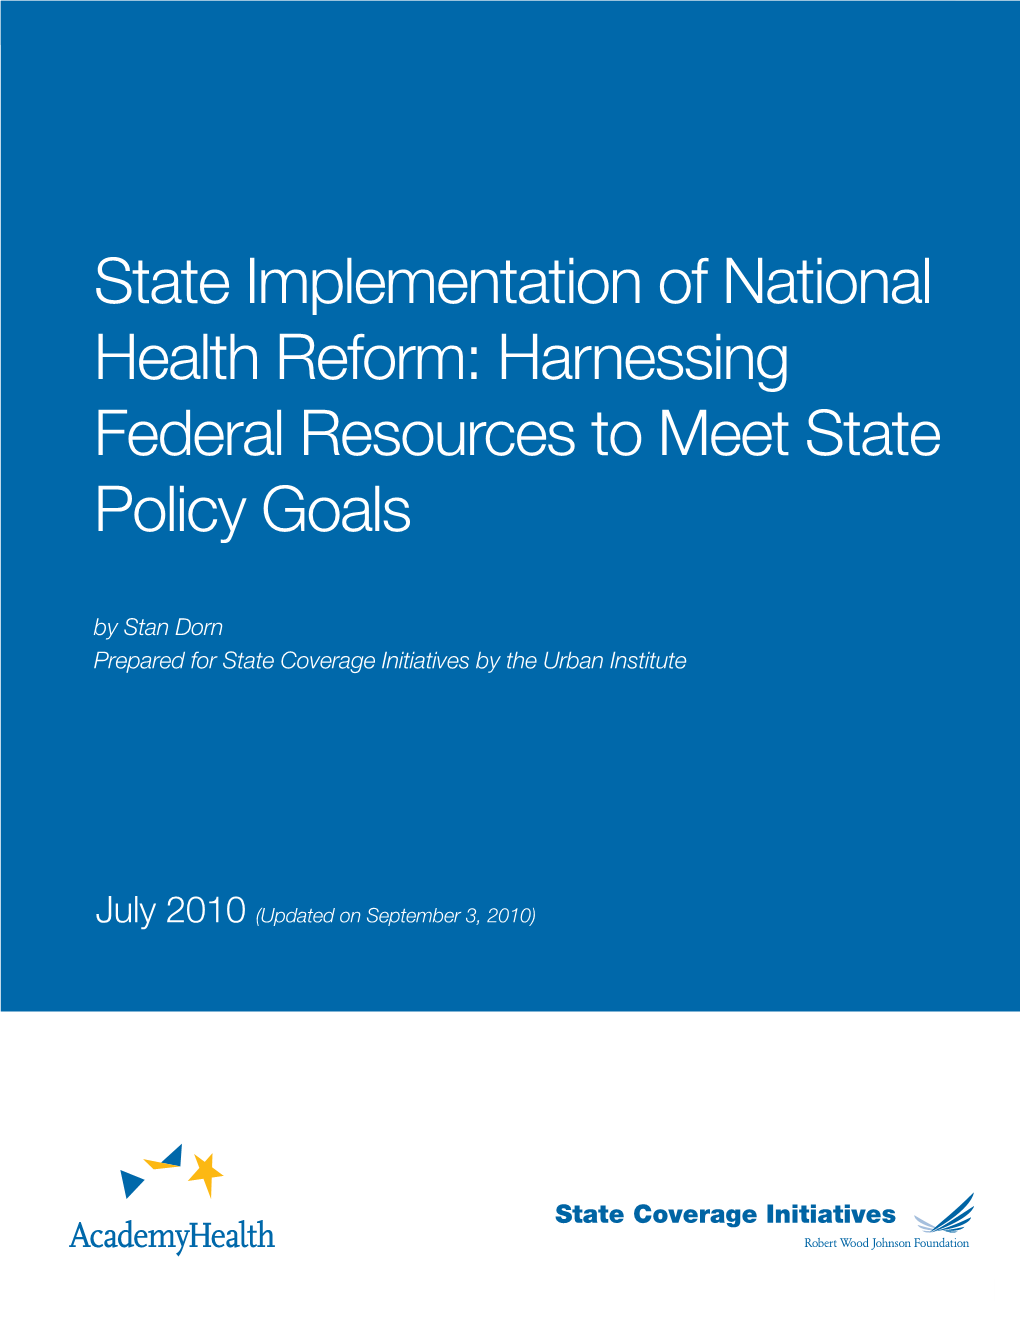 State Implementation of National Health Reform: Harnessing Federal Resources to Meet State Policy Goals